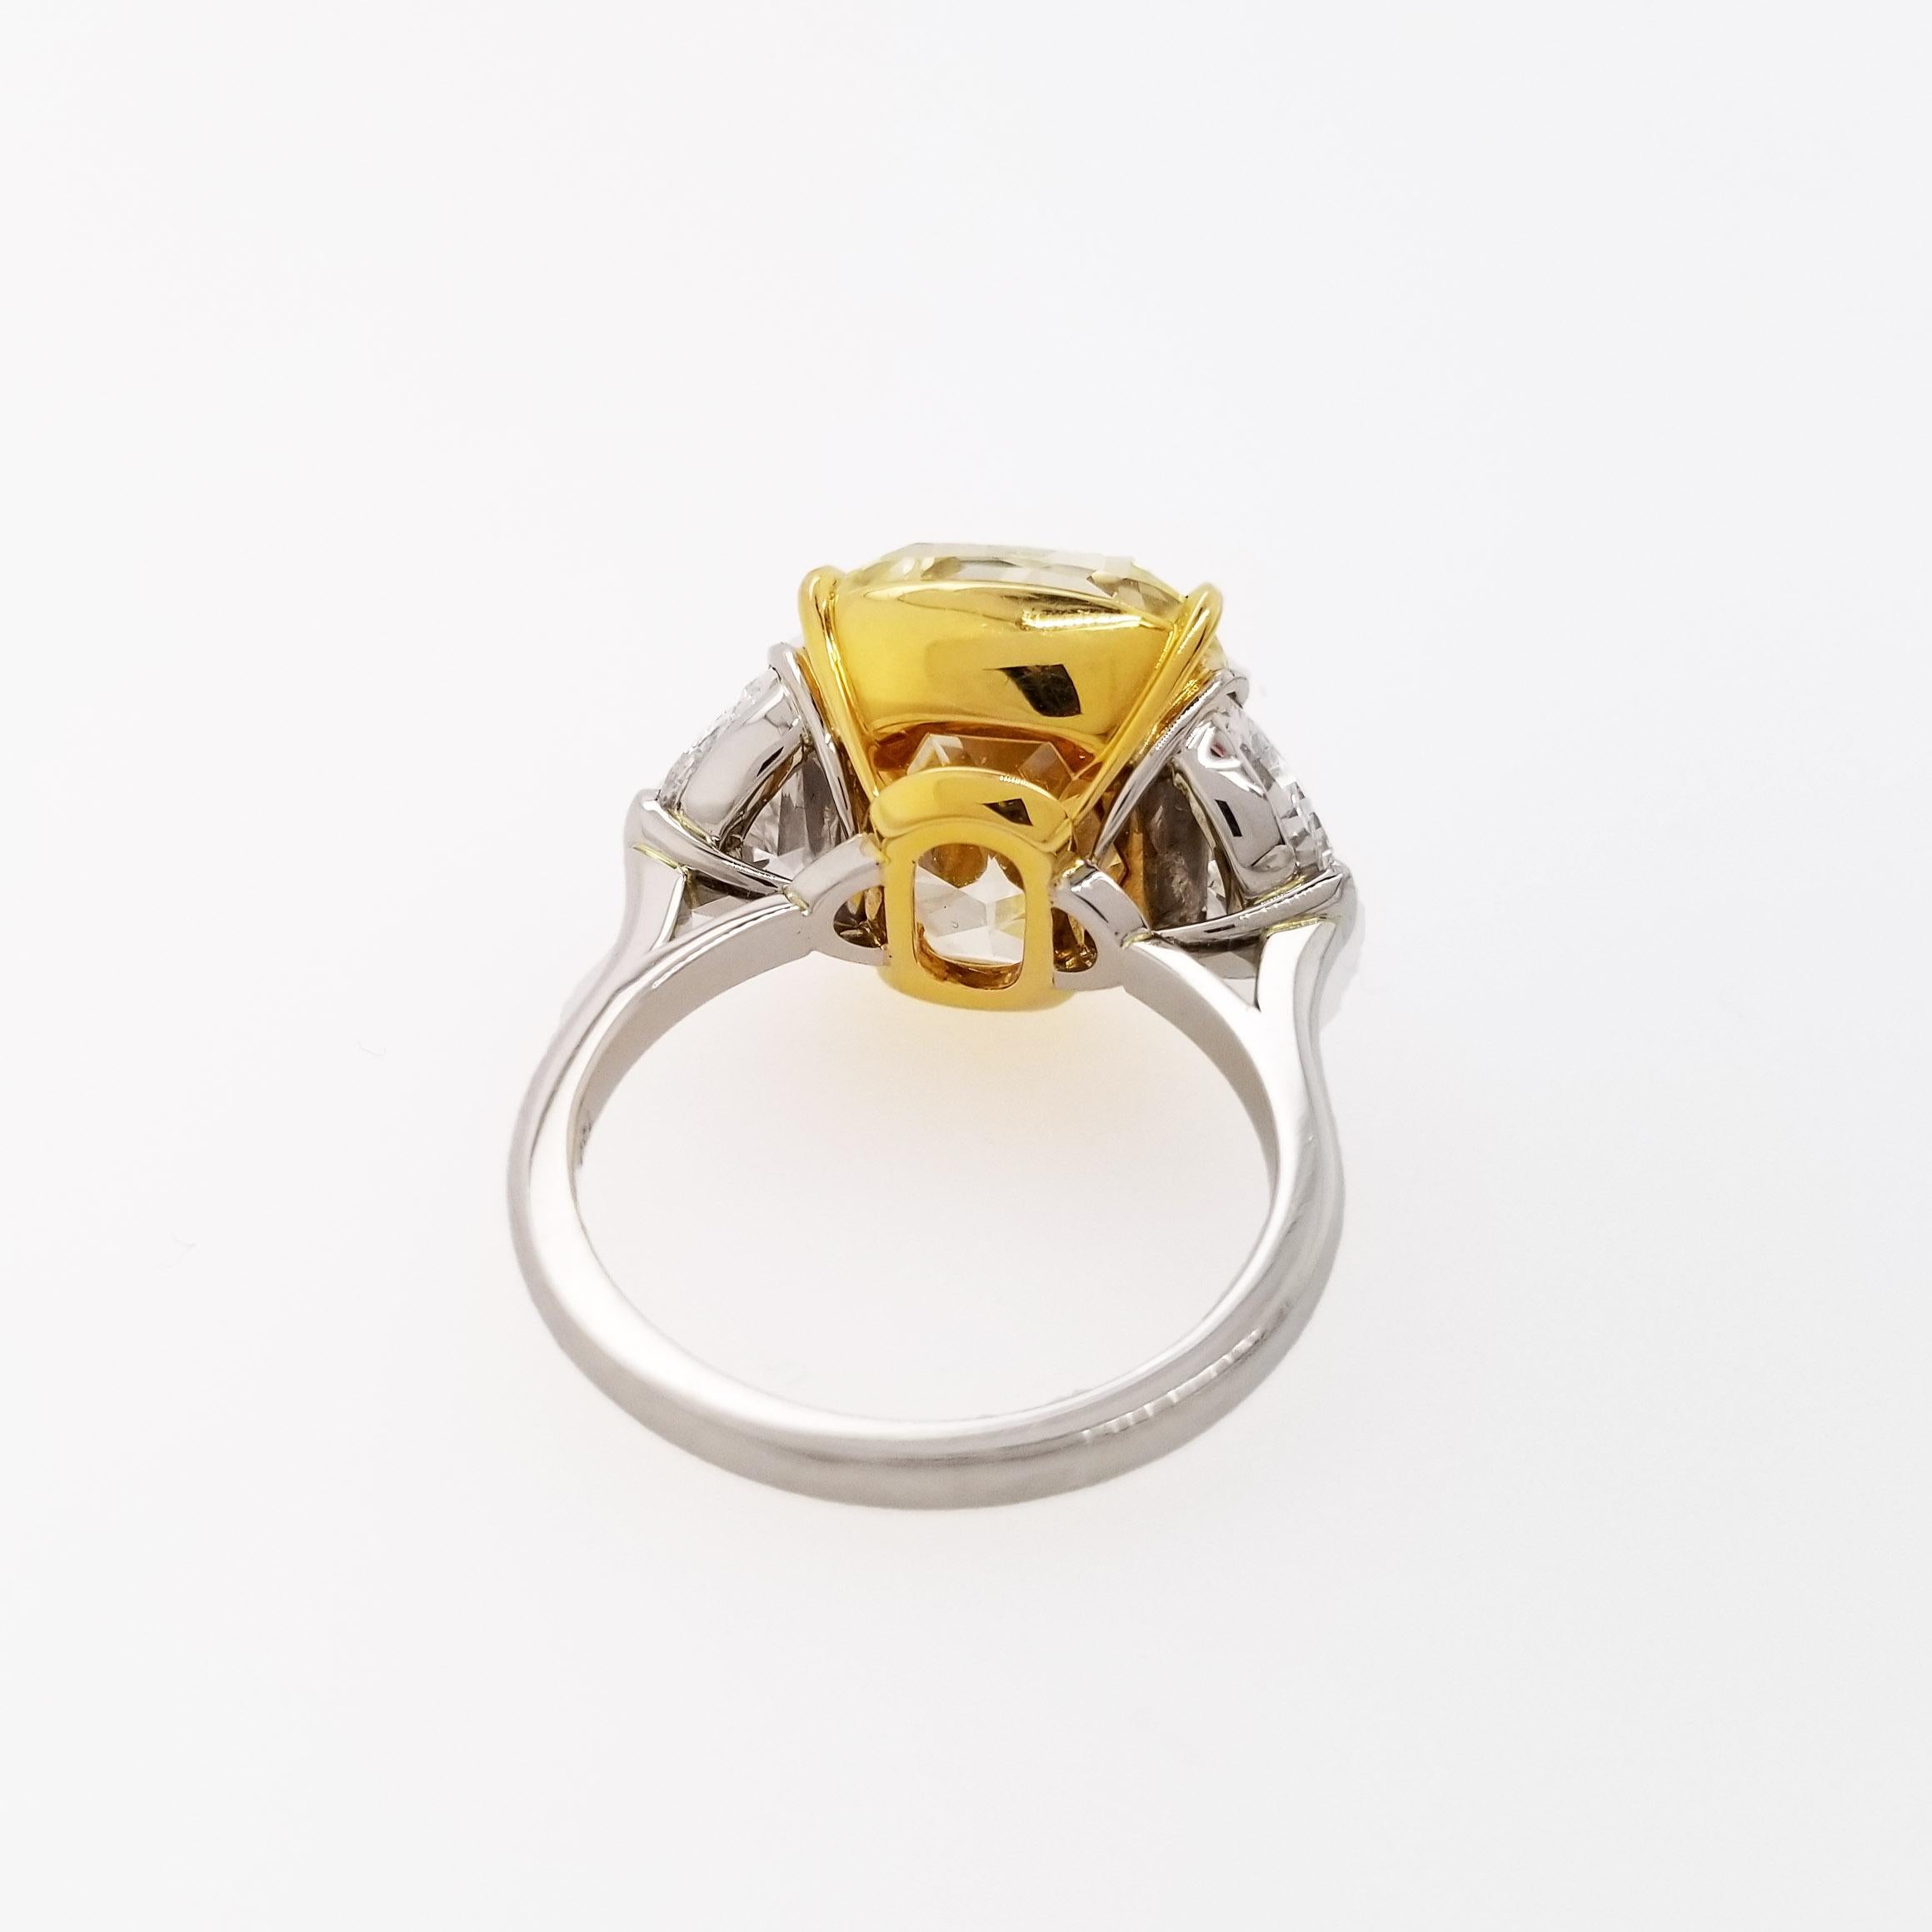 Women's or Men's SCARSELLI 11 Carat Fancy Yellow Diamond Engagement Ring in Platinum For Sale